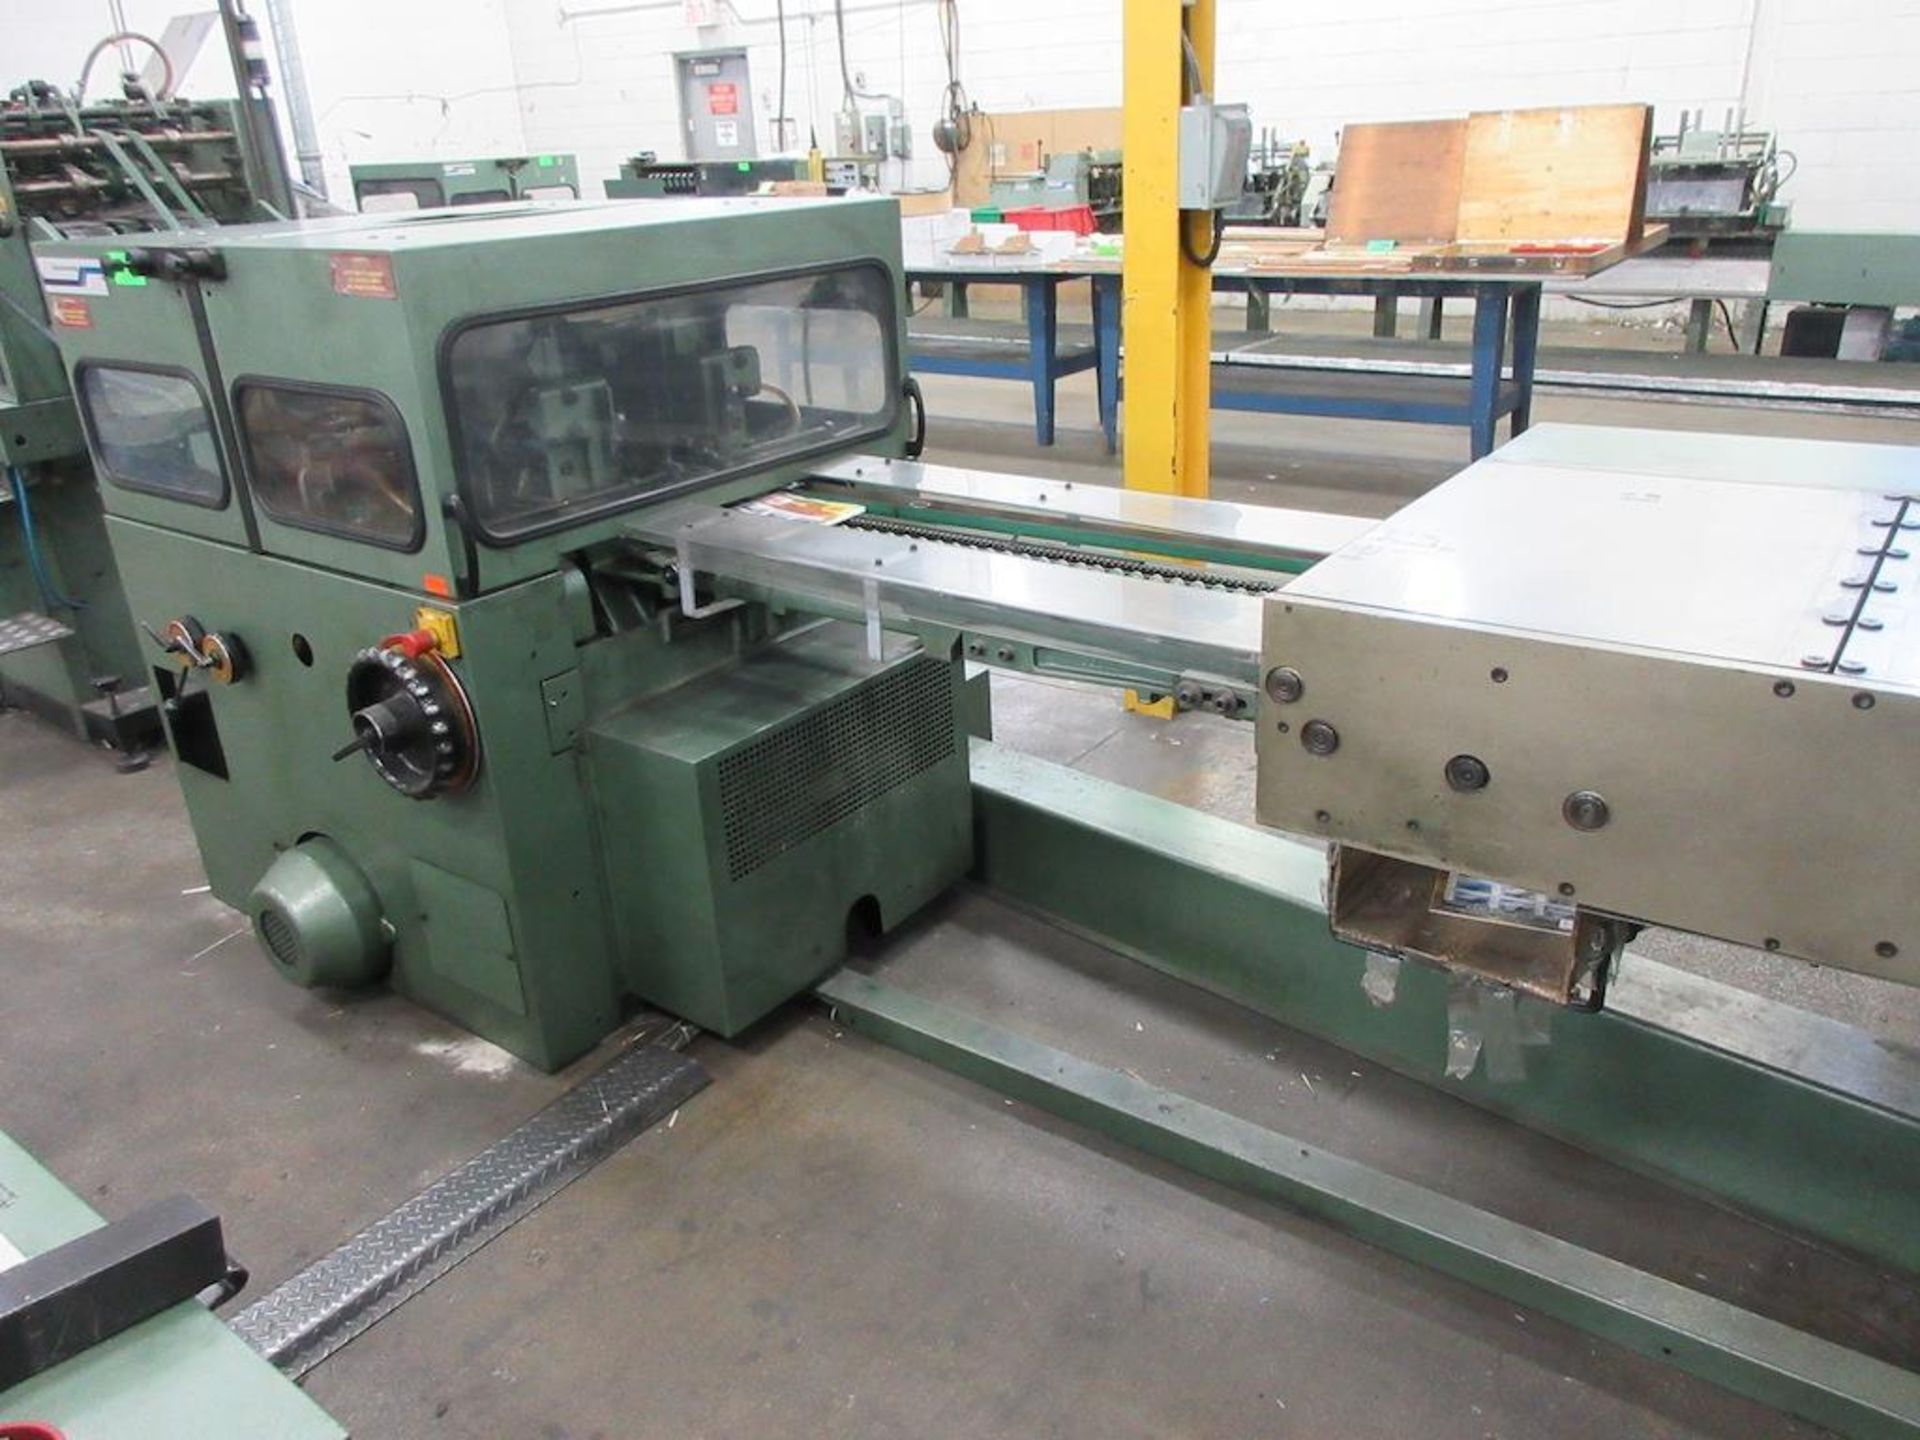 Muller 335 (6 Stations + Cover Feeder) includes Muller Stacker Muller 6 Stations: Type 306, sn 99.31 - Image 14 of 30